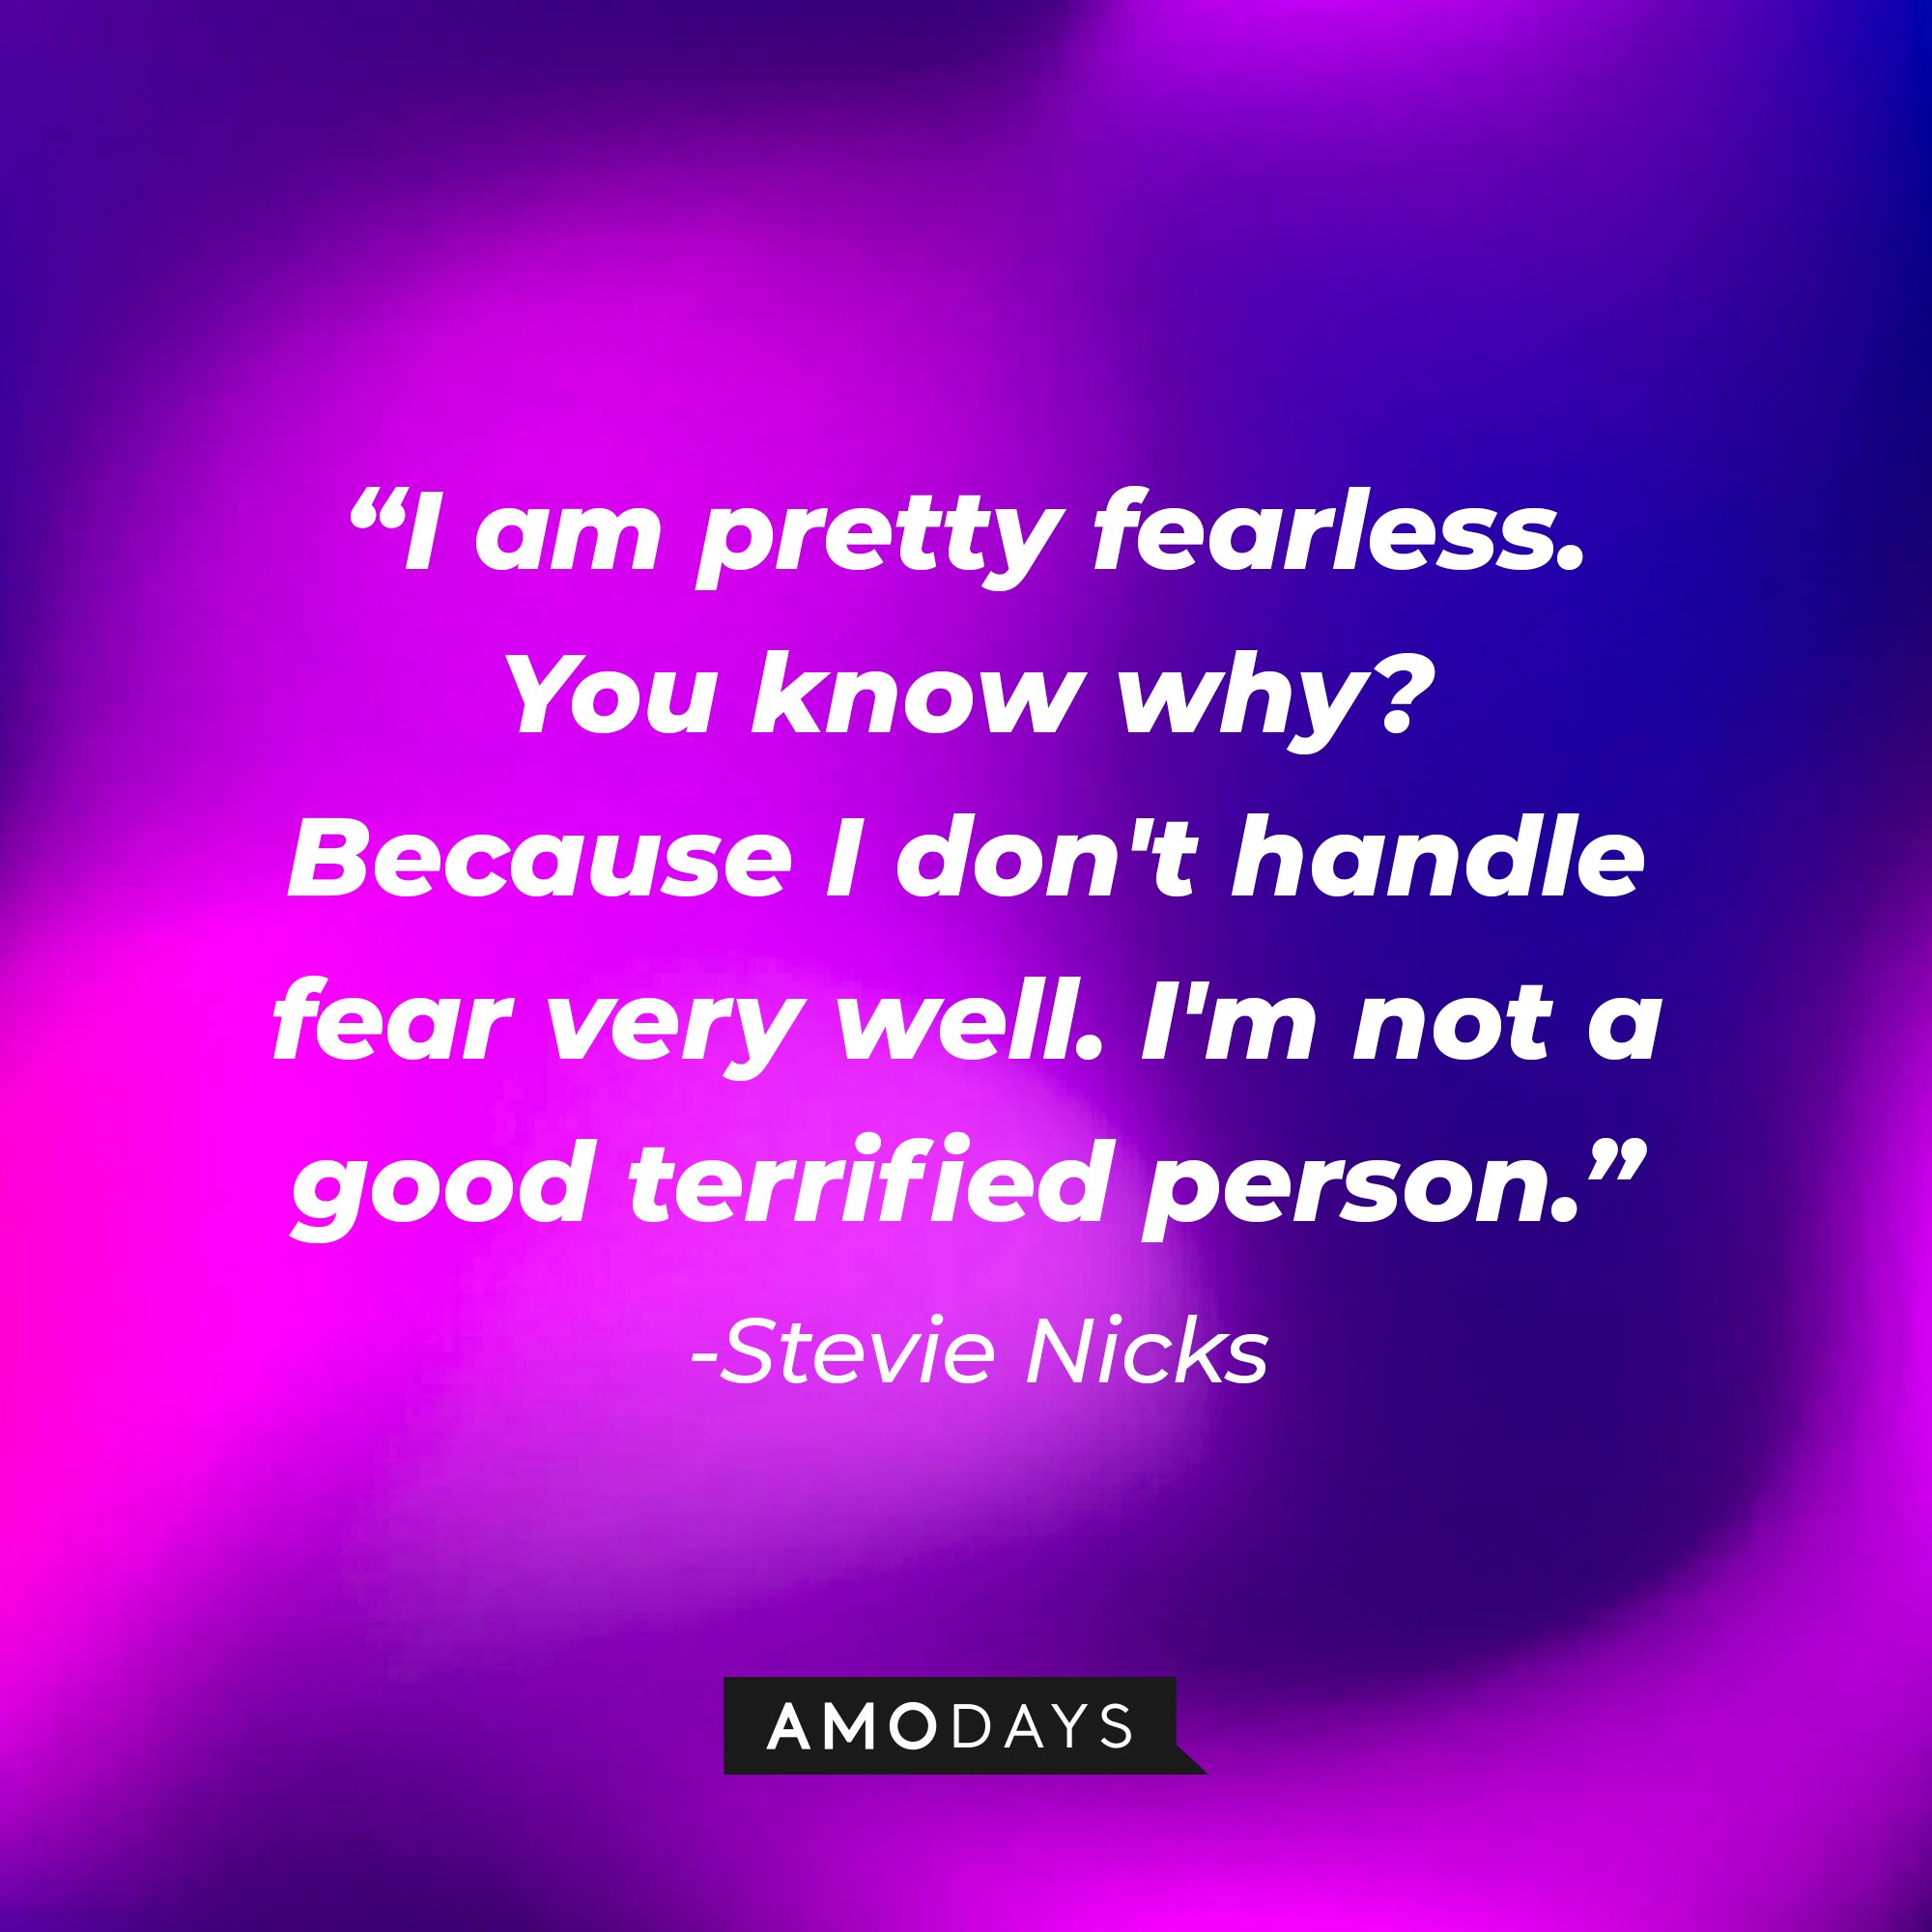 Stevie Nicks's quote: "I am pretty fearless. You know why? Because I don't handle fear very well. I'm not a good terrified person." | Image: AmoDays